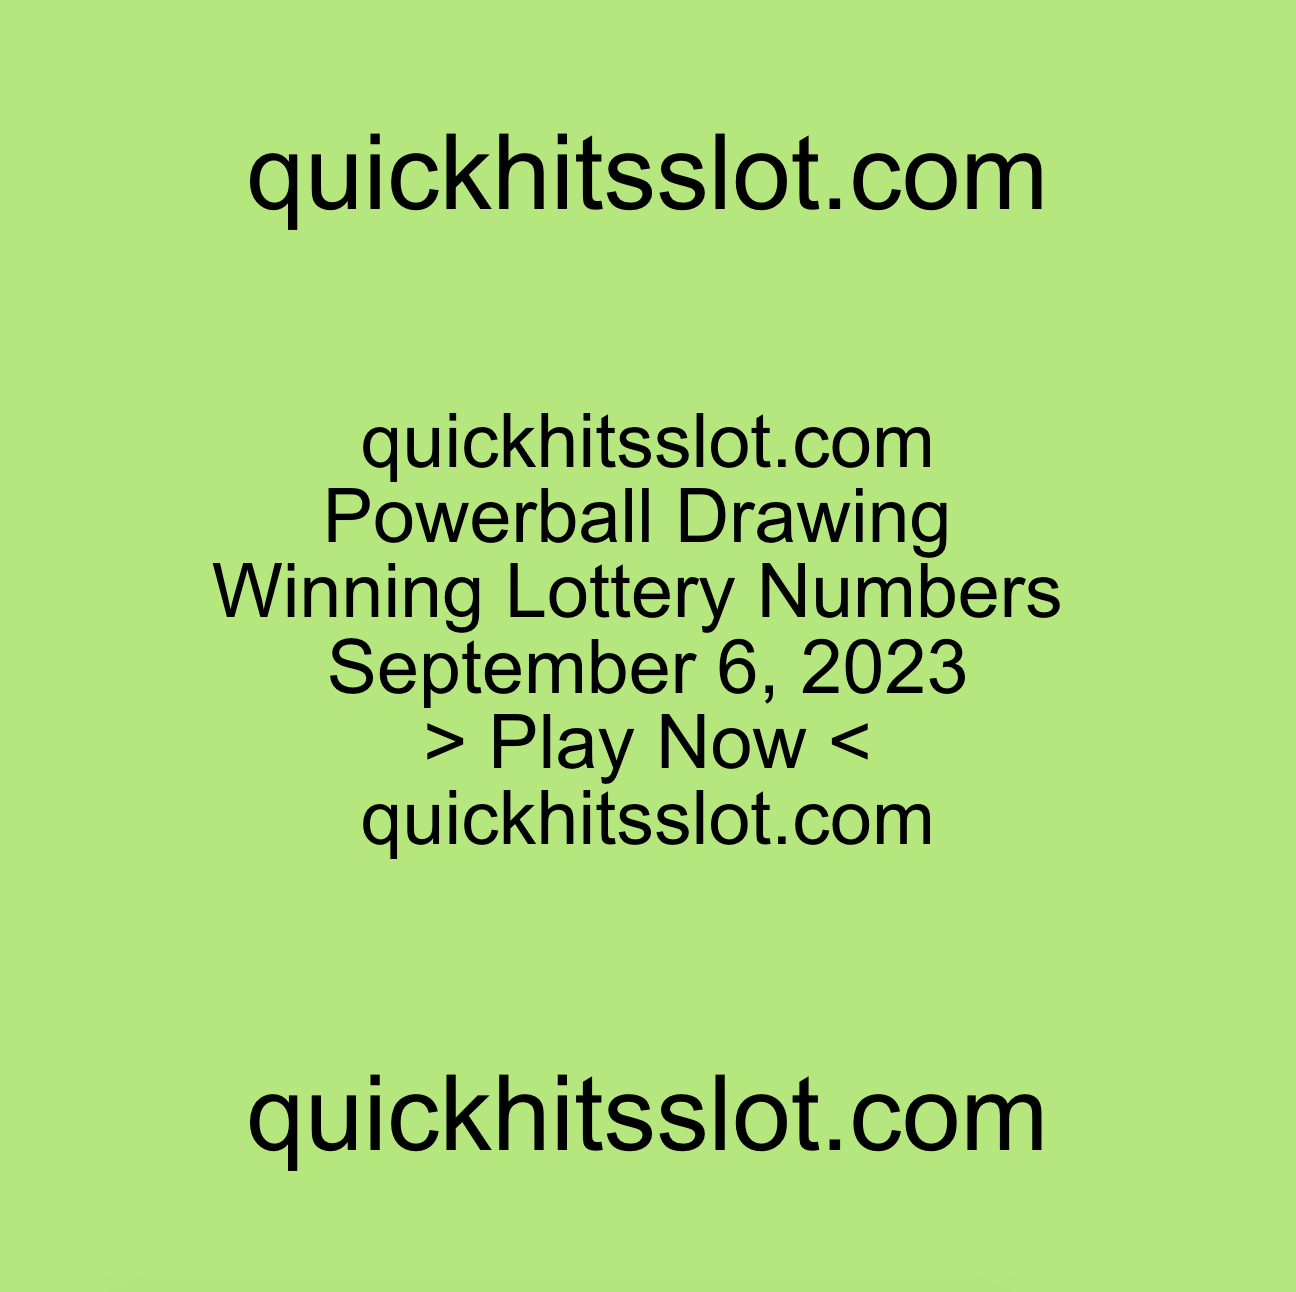 Powerball Drawing Winning Lottery Numbers September 6, 2023